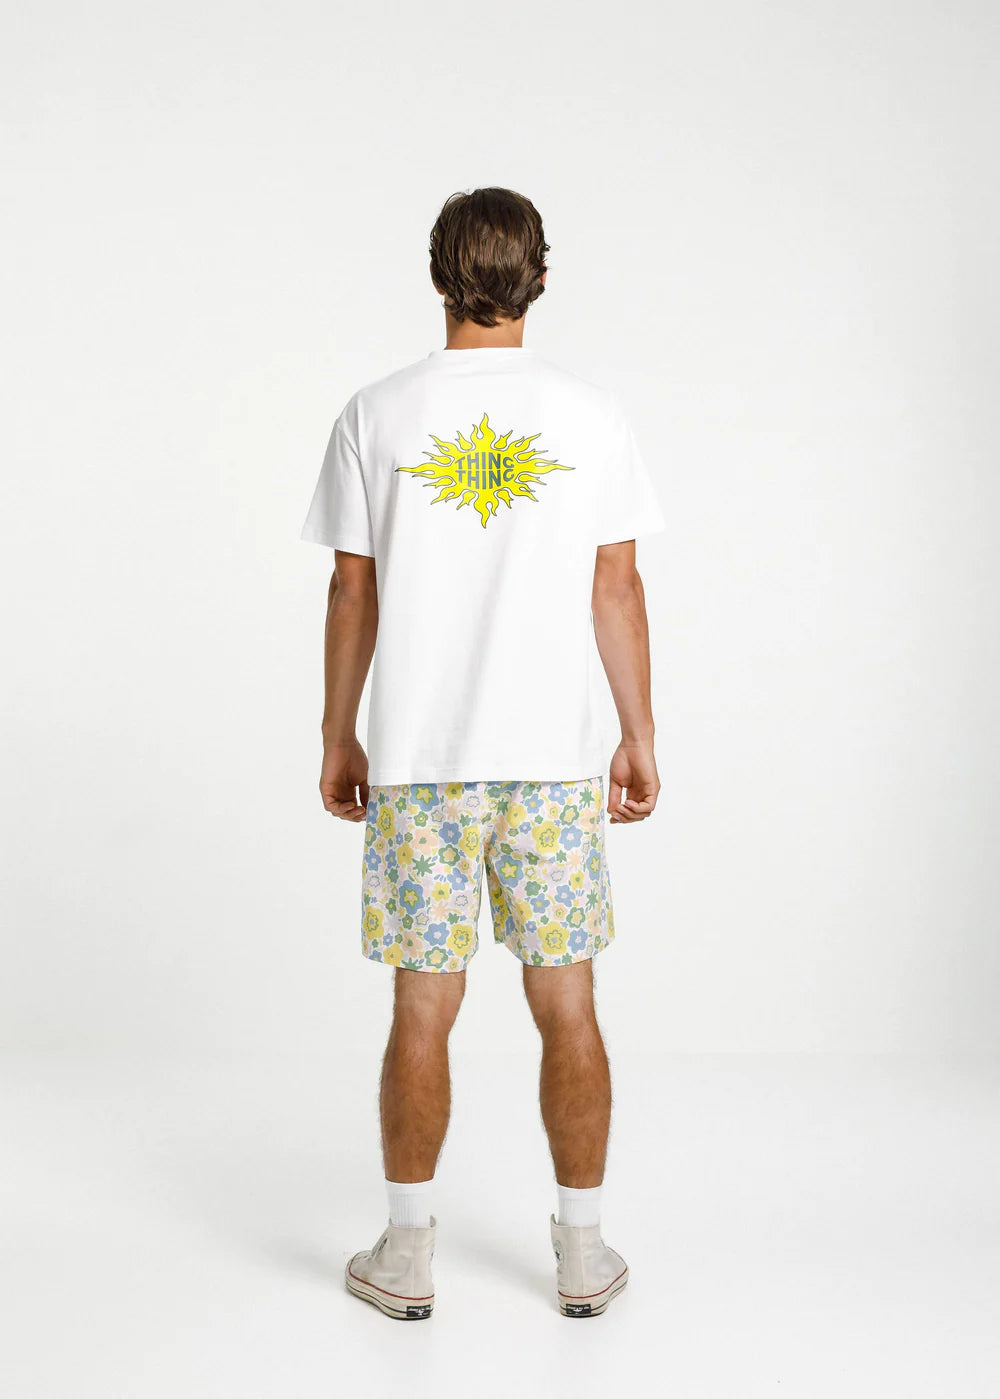 Thing Thing Ample Tee White Flaming Sun